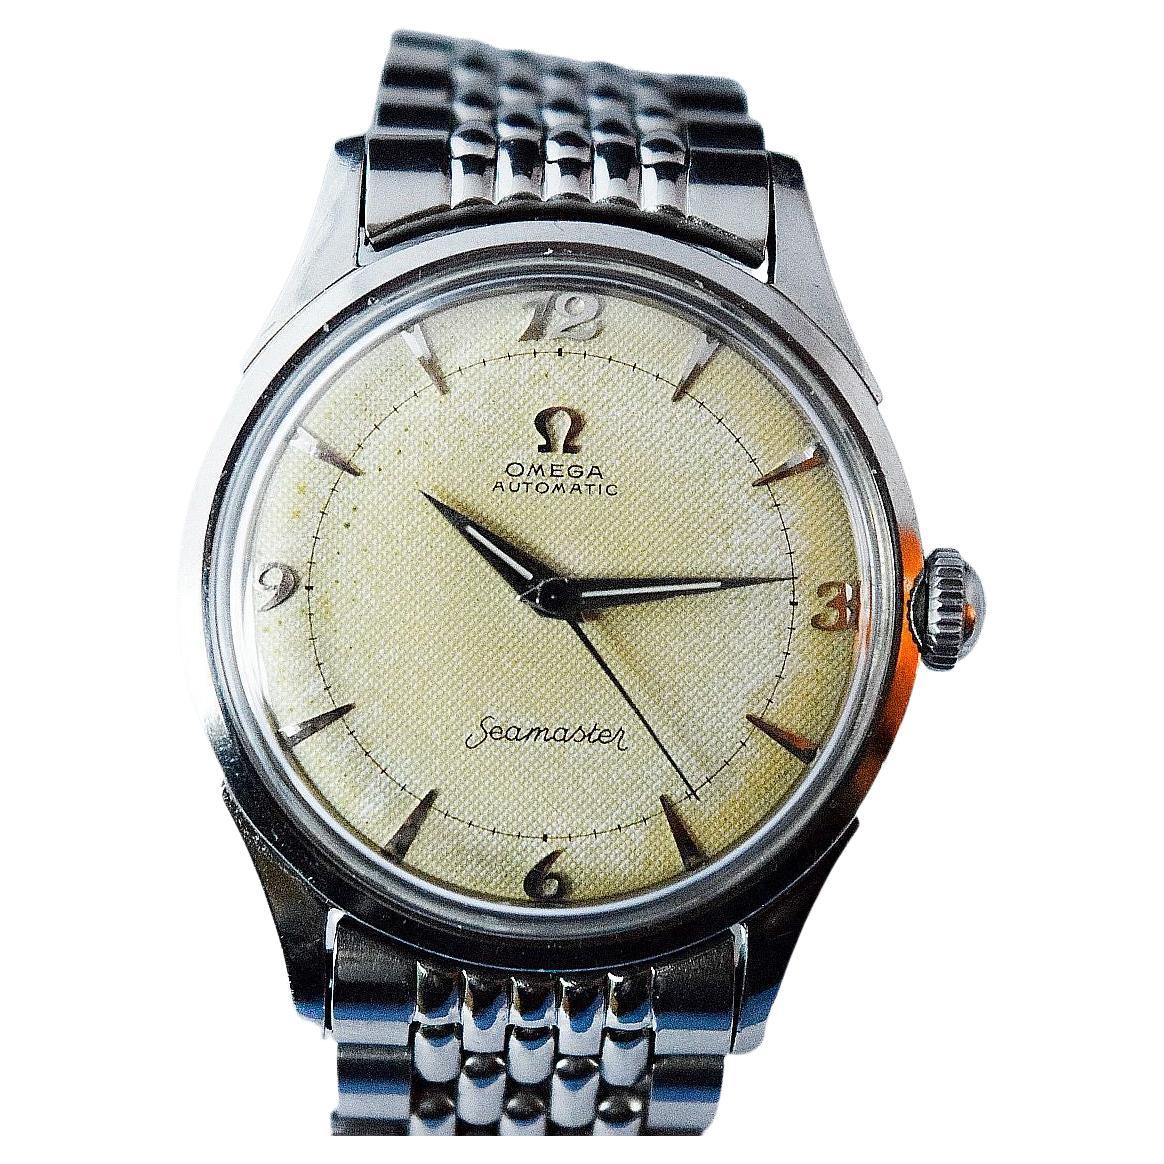 Omega SeaMaster Bumper Automatic original Textured dial steel with Rice bracelet